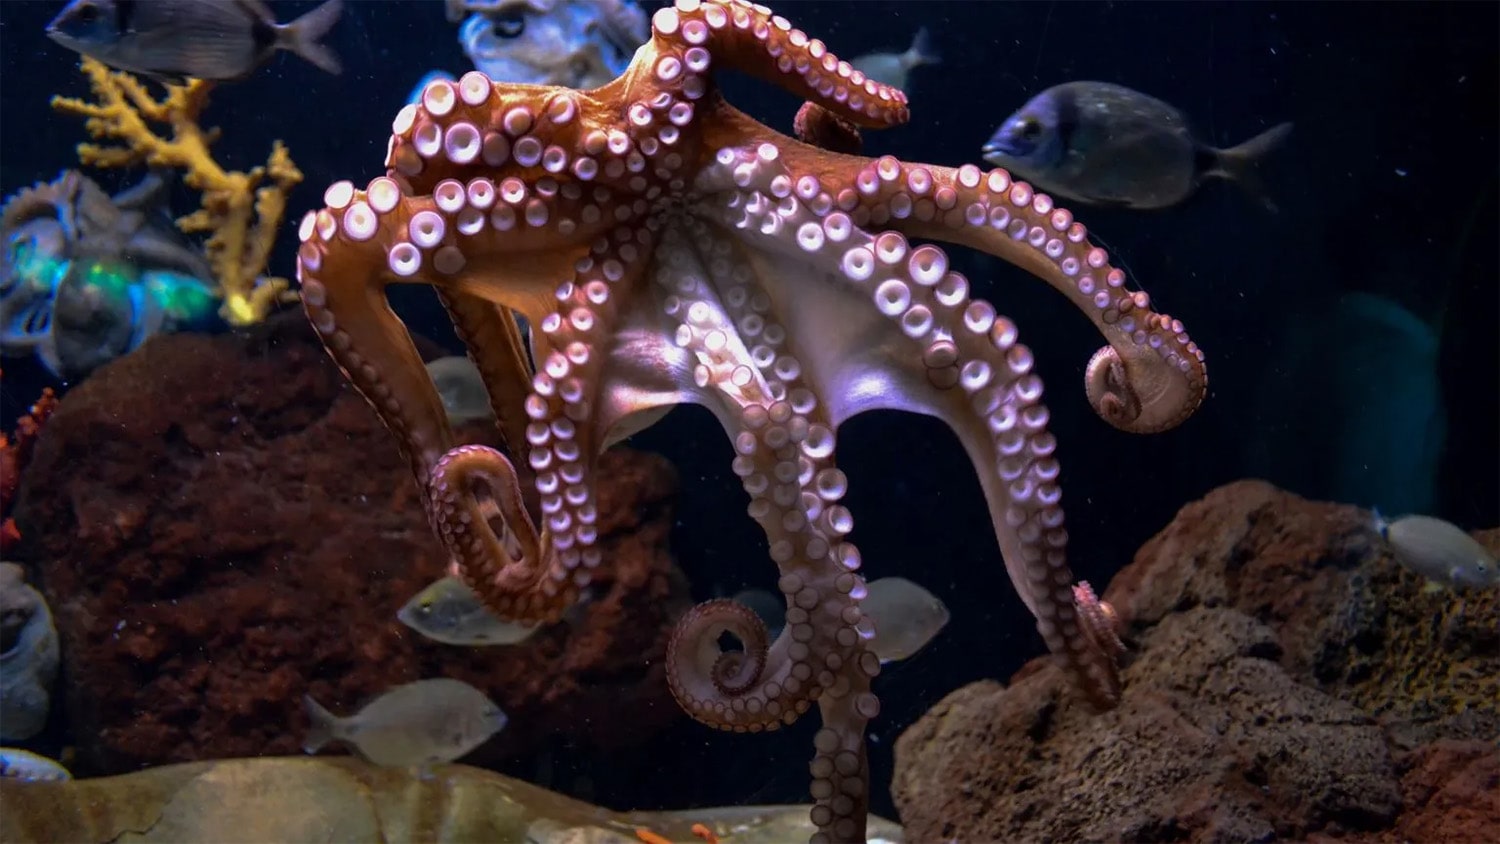 37 interesting facts about octopuses